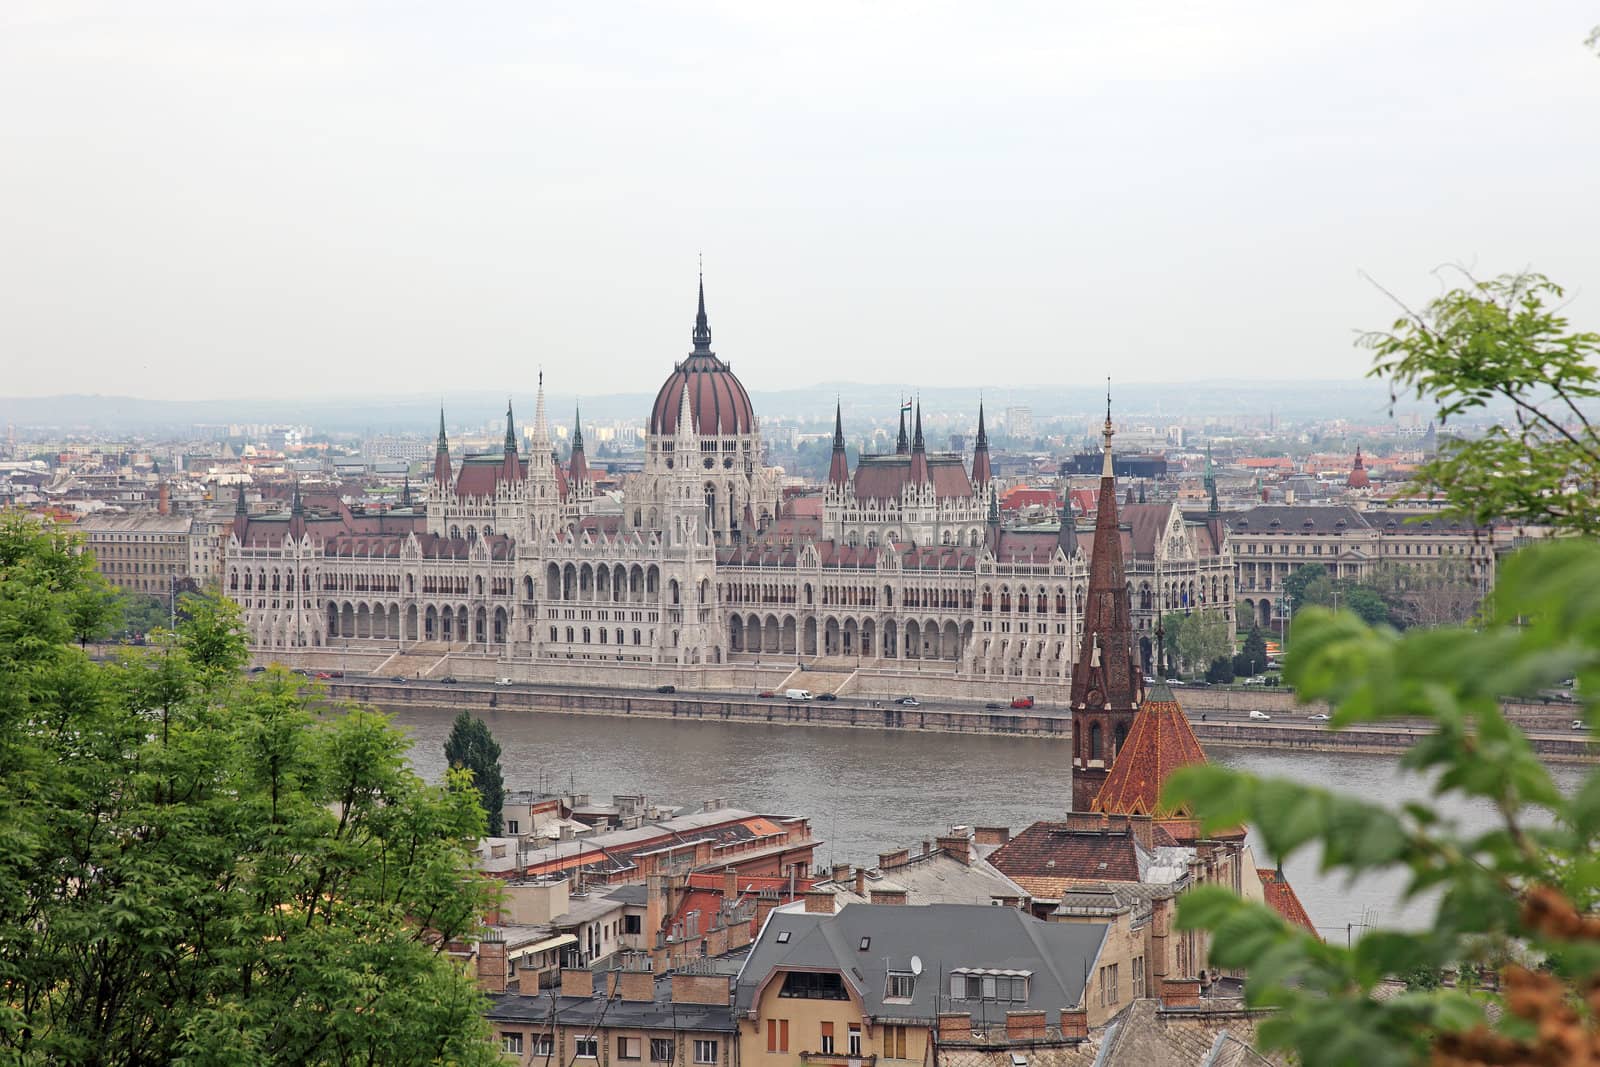 Parliament of Hungary gothic building in Budapest, Europe.